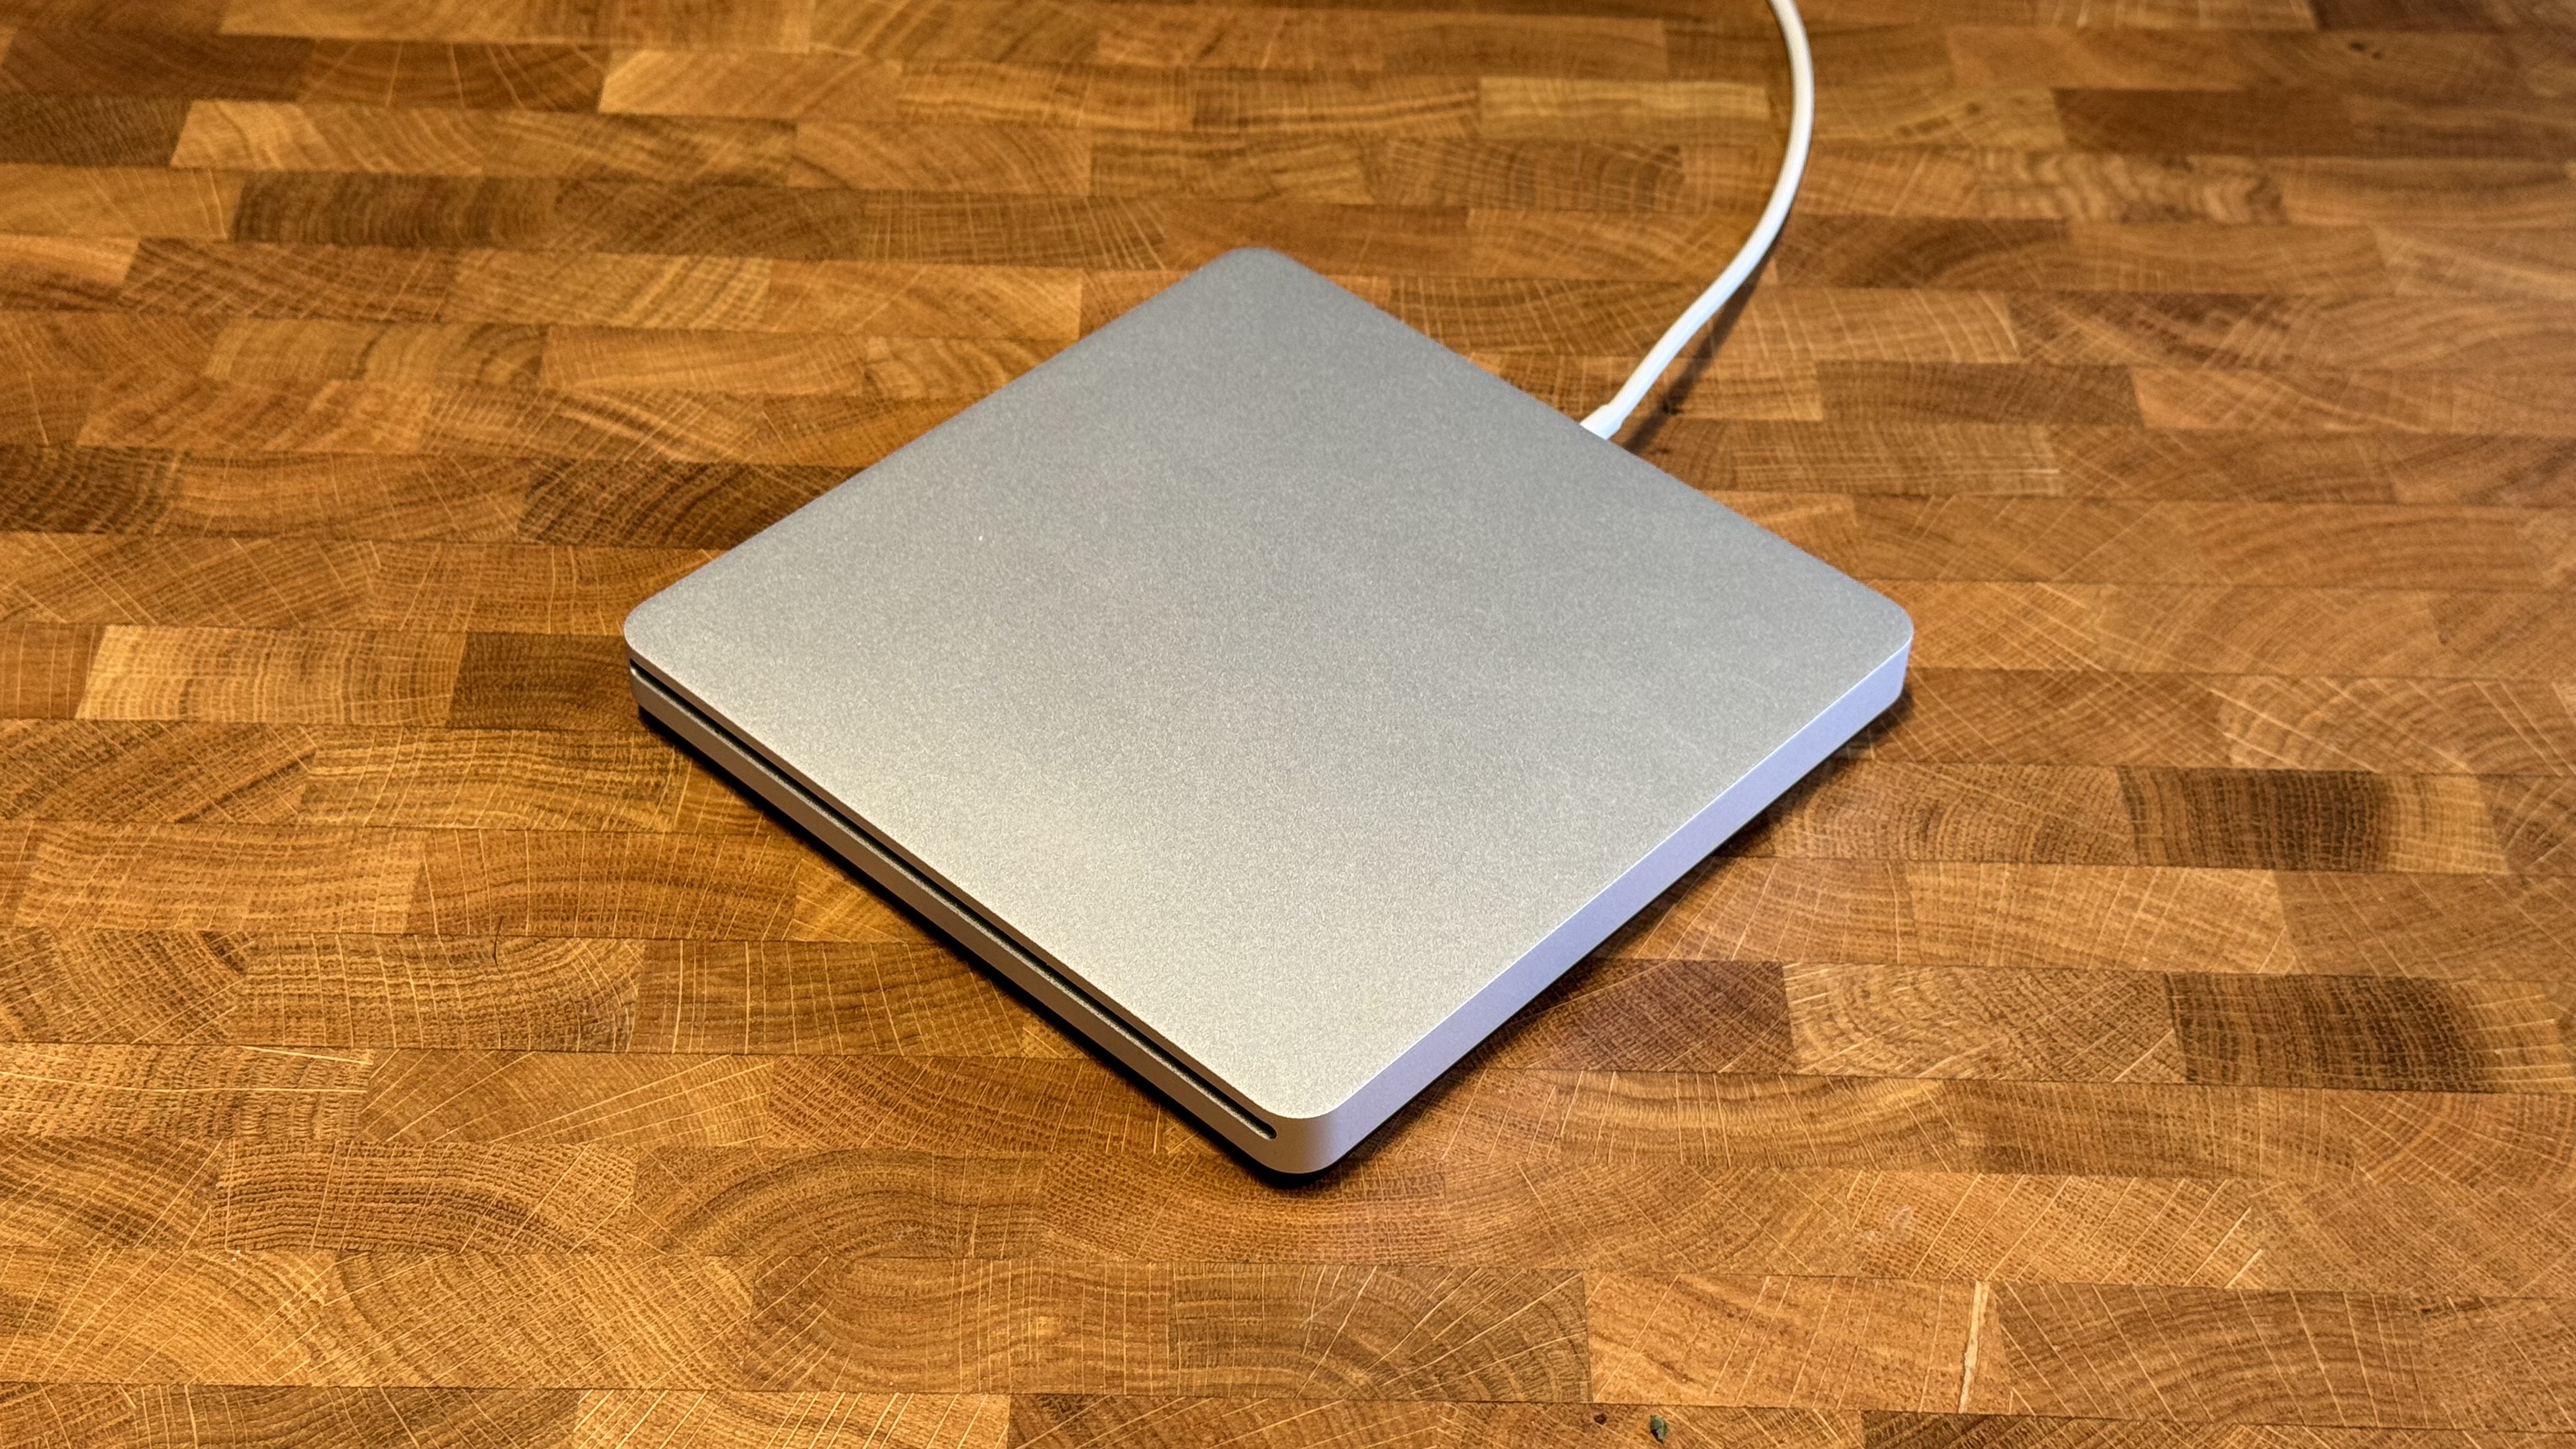 Apple SuperDrive review: A CD/DVD drive "Designed by Apple in California"